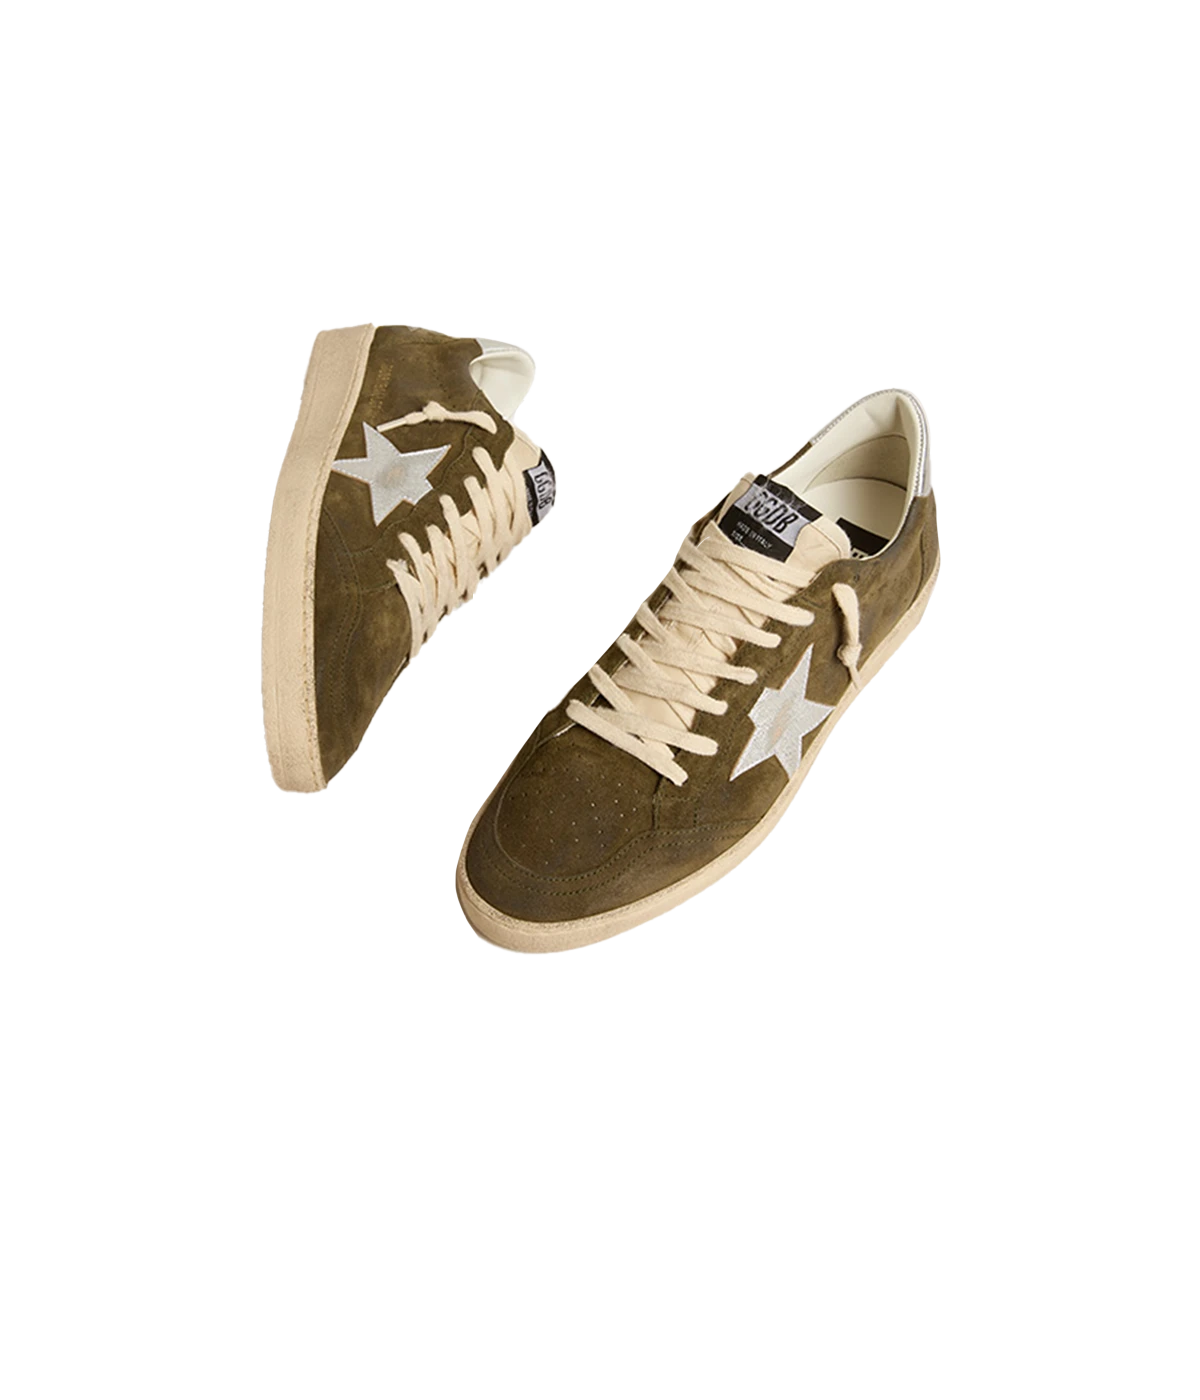 Ball Star Sneakers in Olive Night & Silver